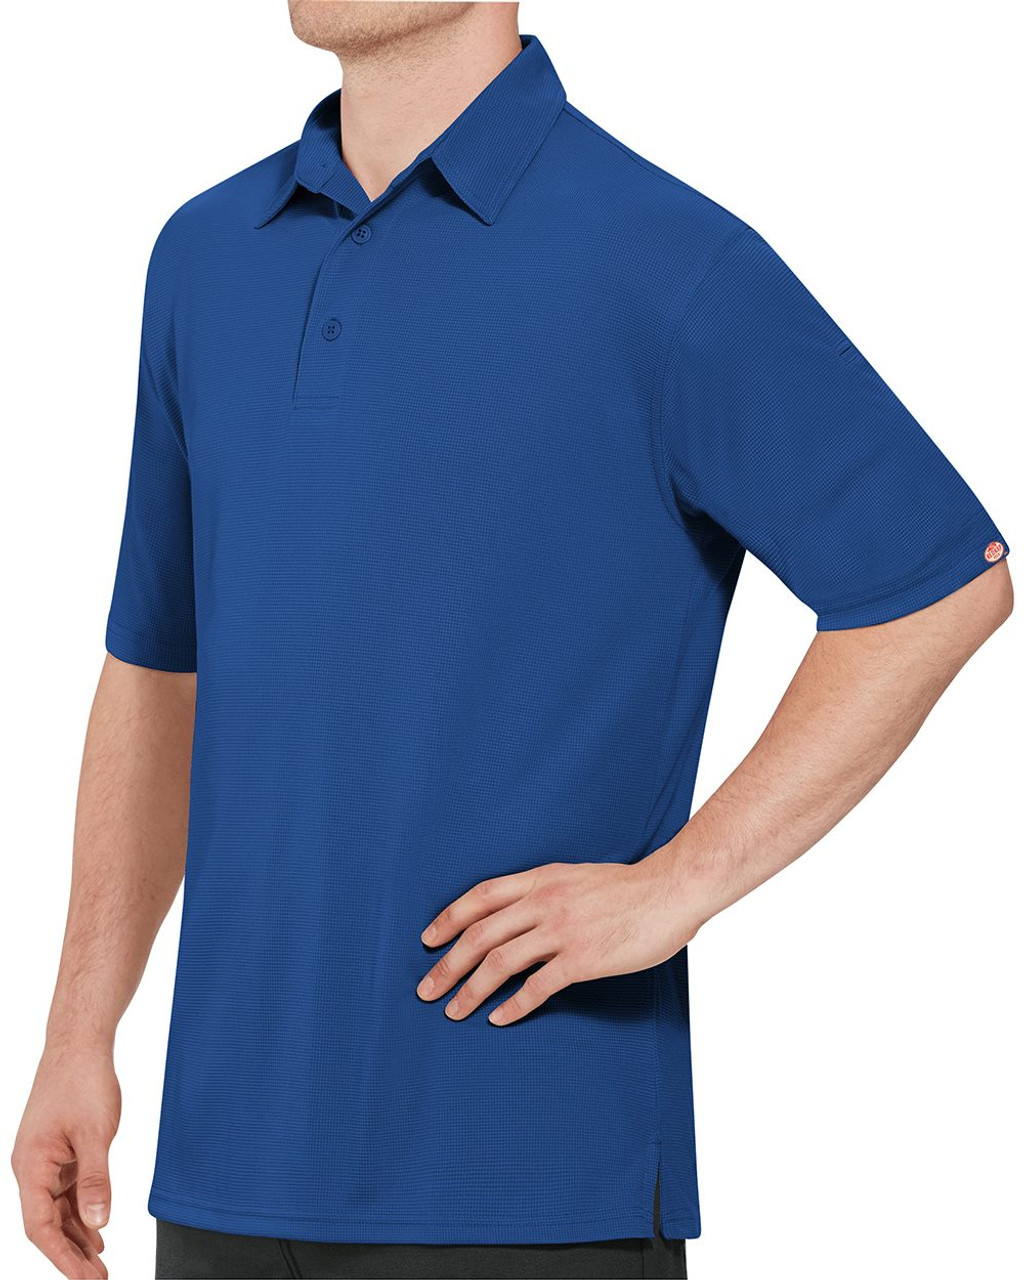 Embroidered Performance Knit® Flex Series Pro Polo - SK90